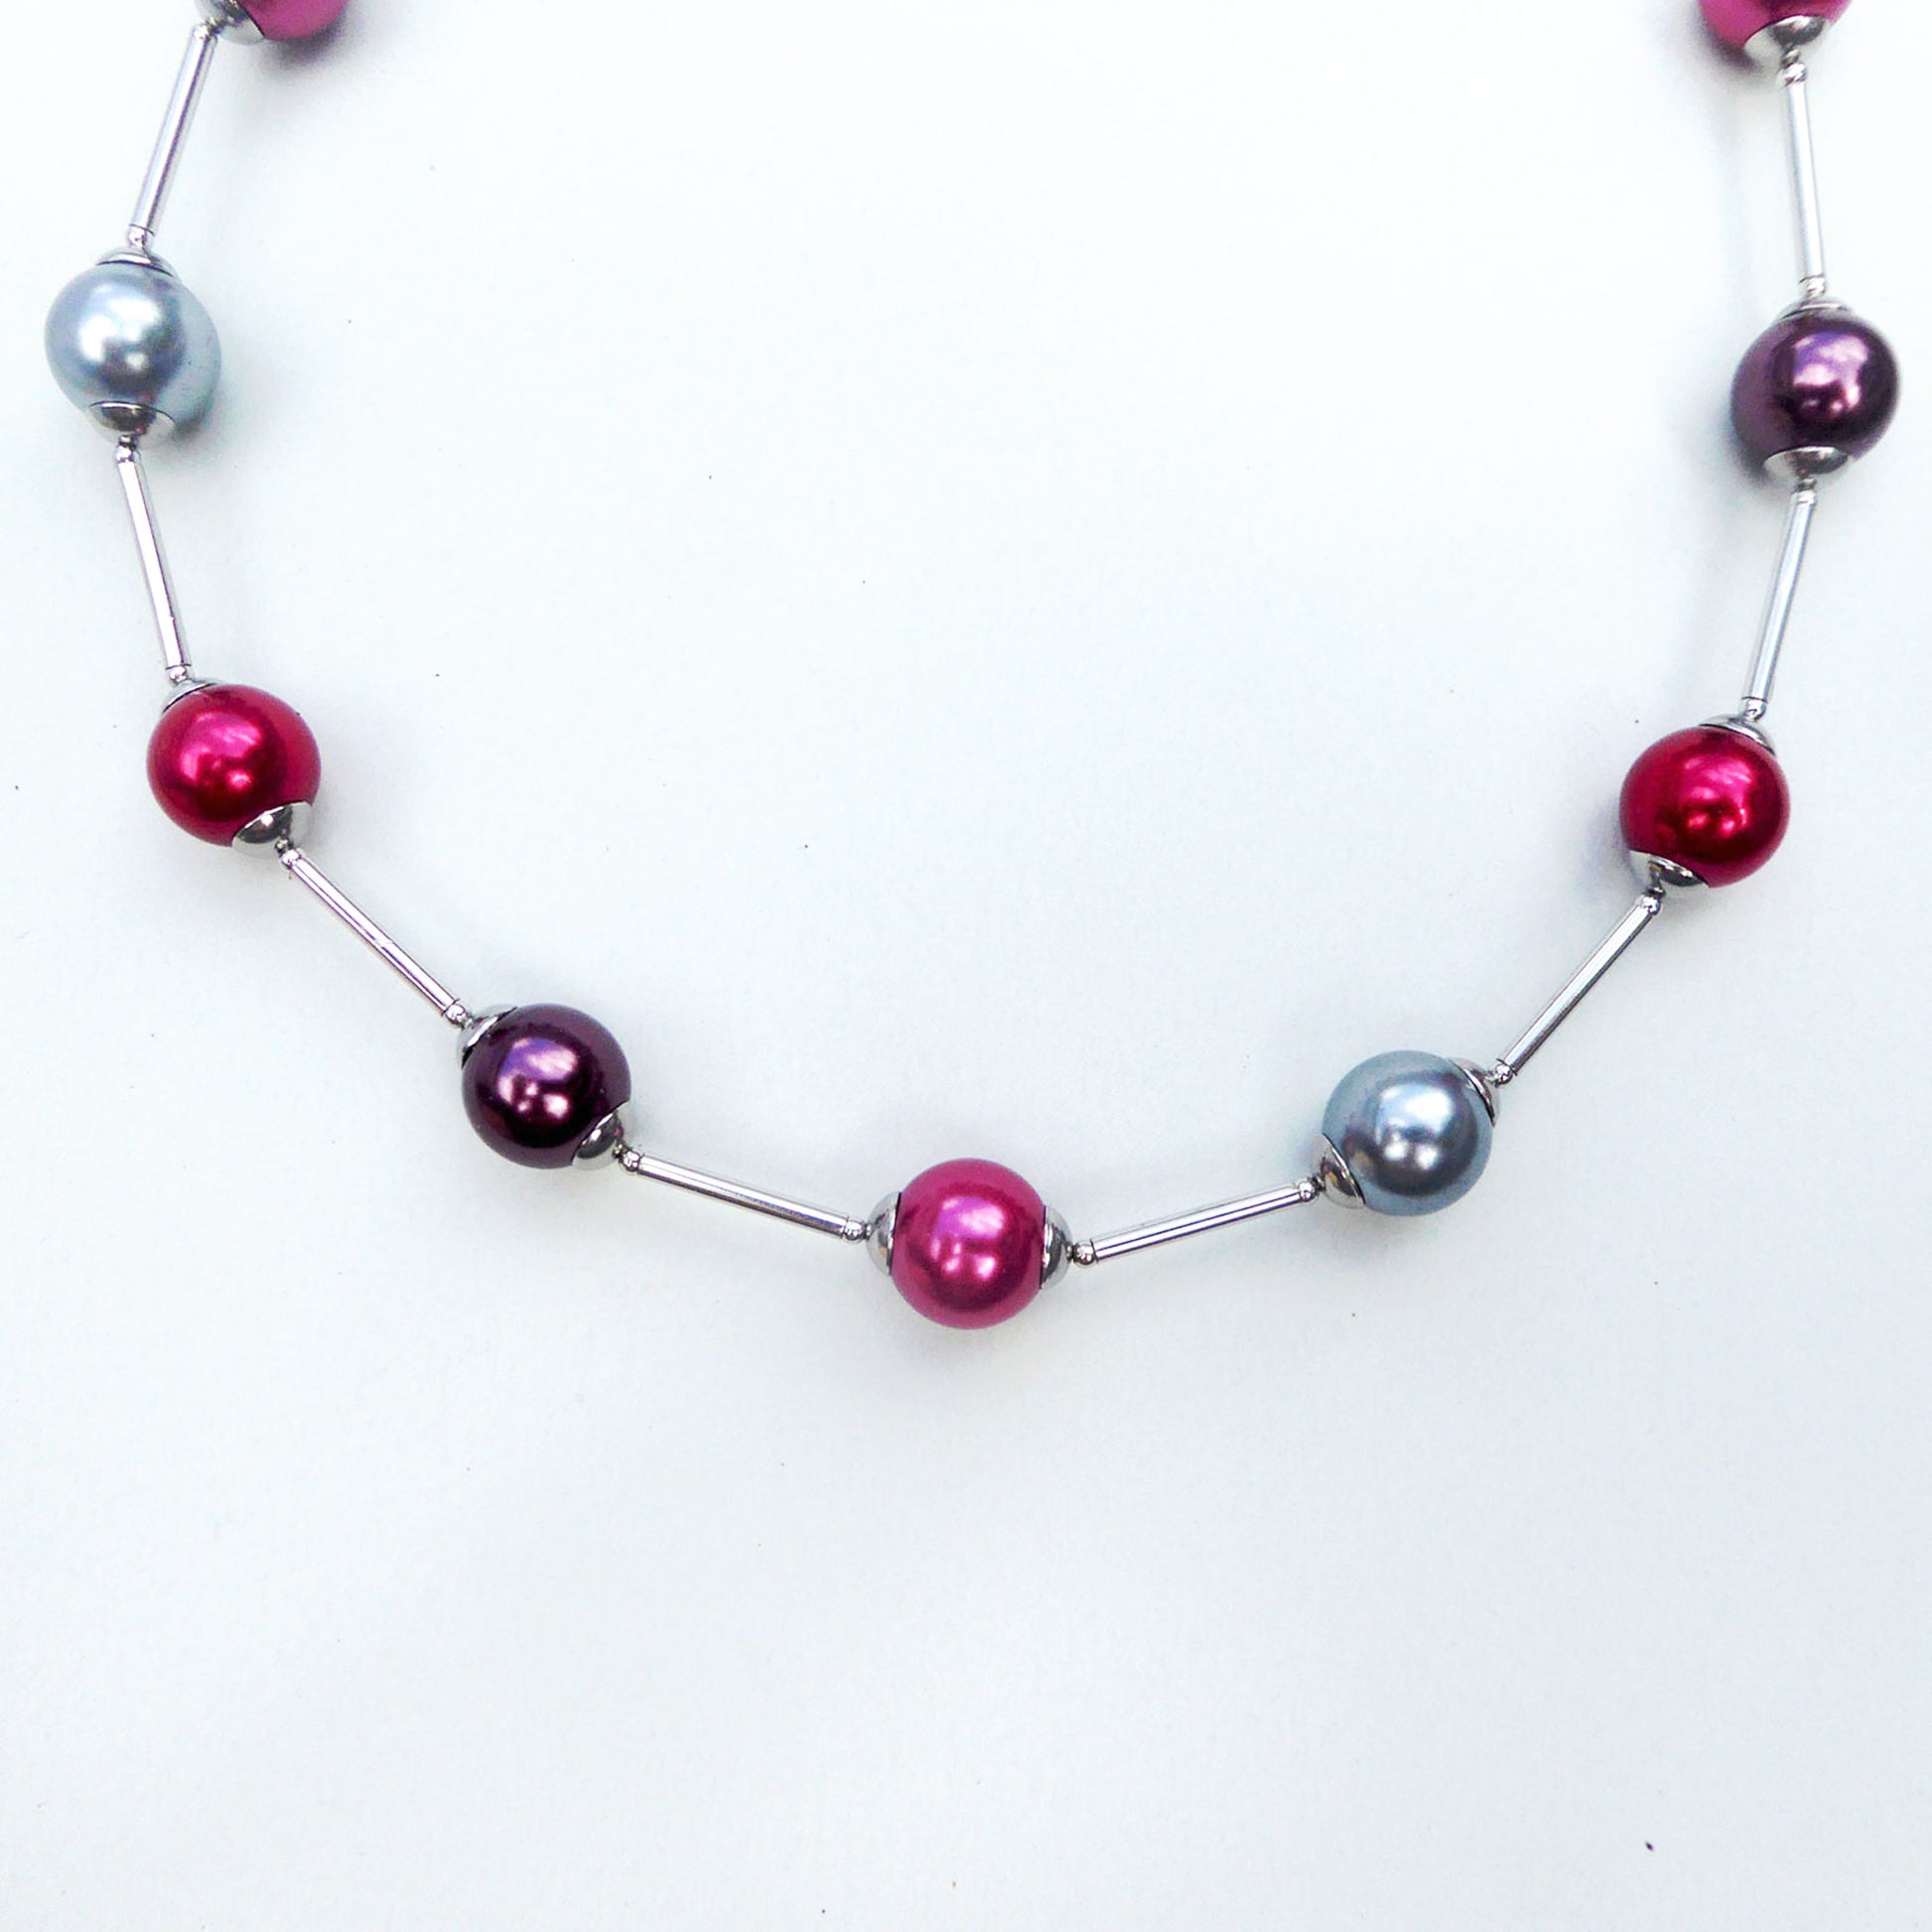 Glass pearl orb-style necklace in reds and grey